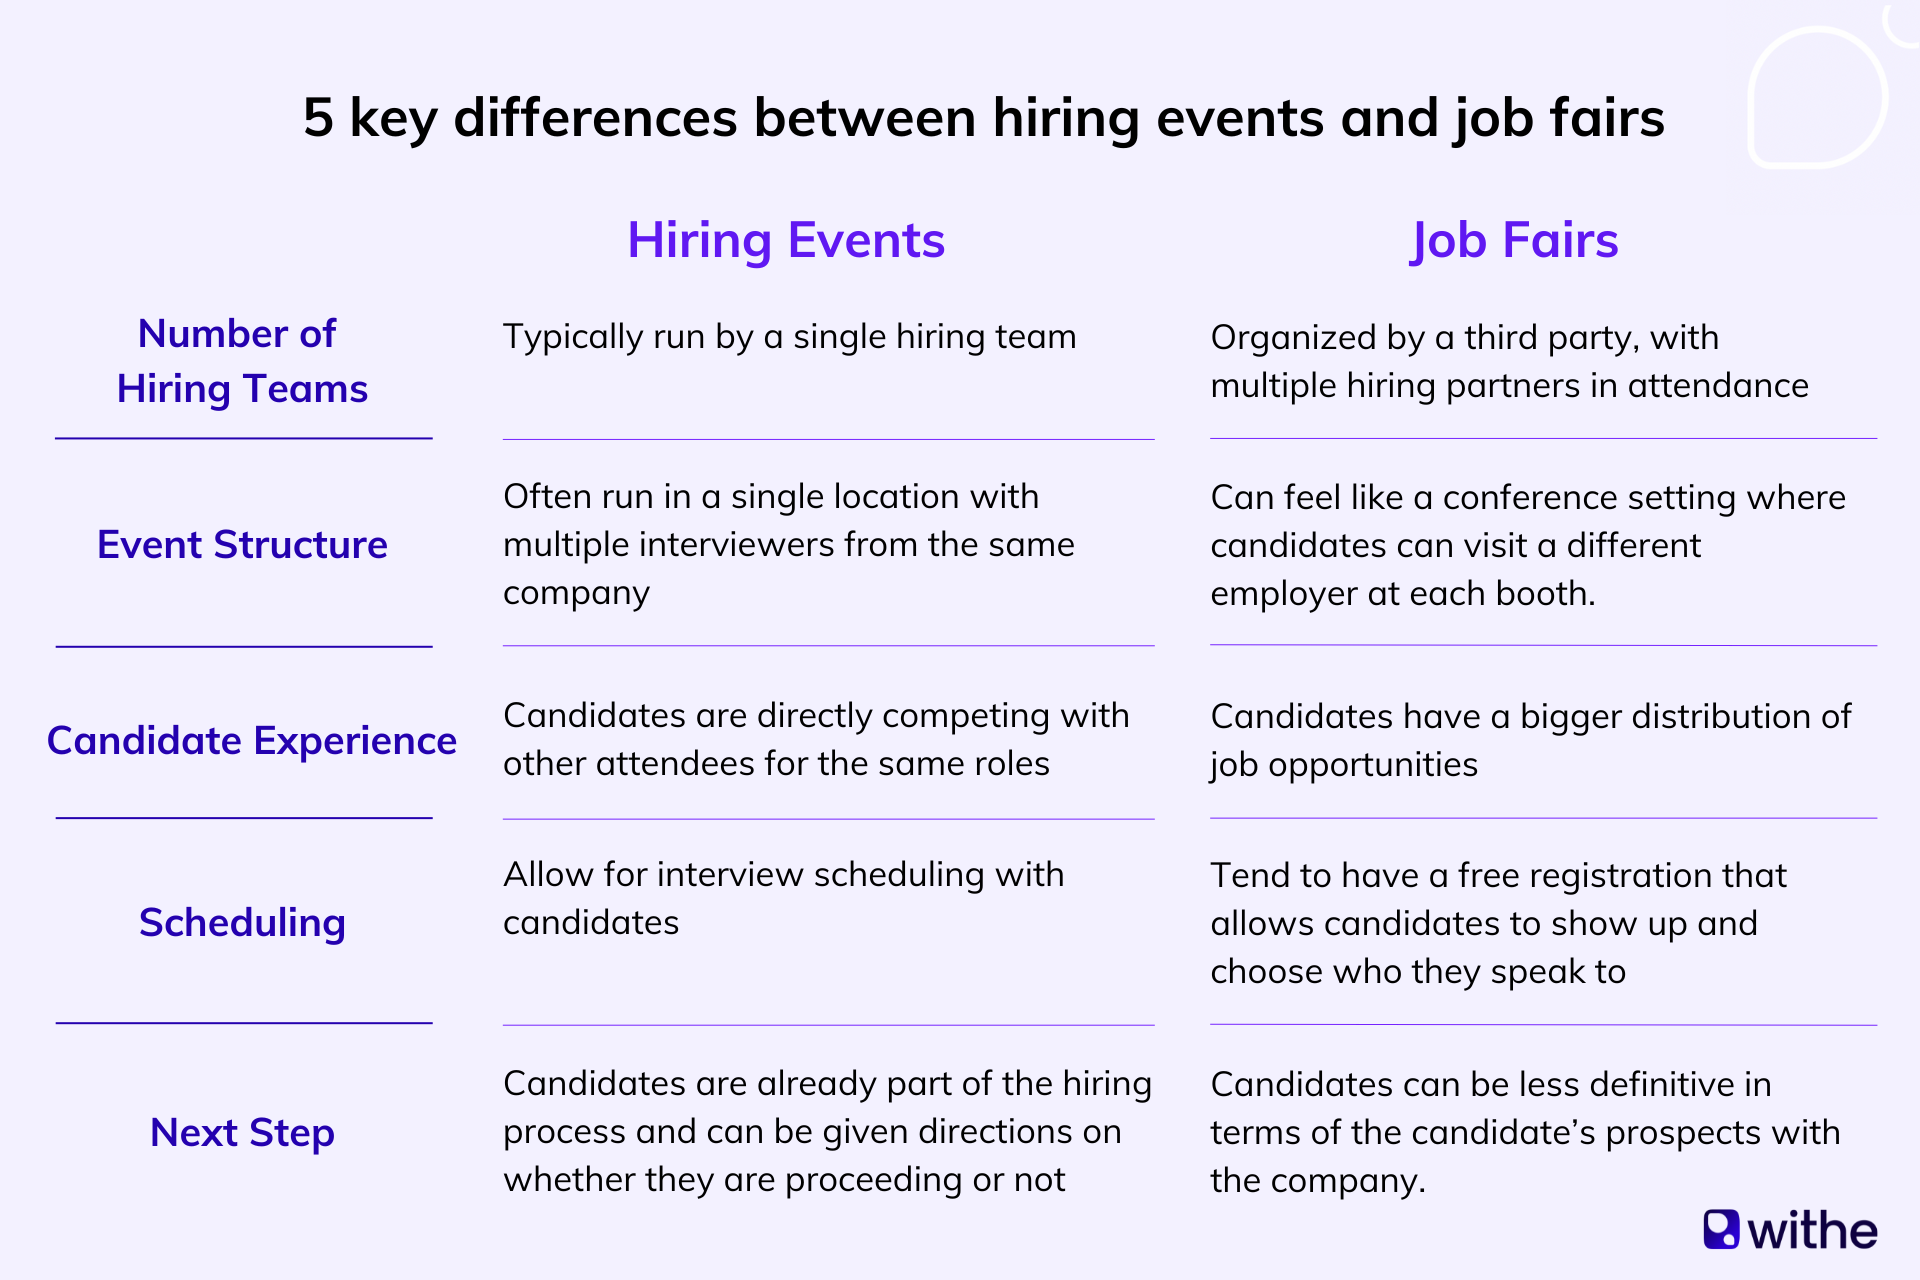 5 key differences between hiring events and job fairs